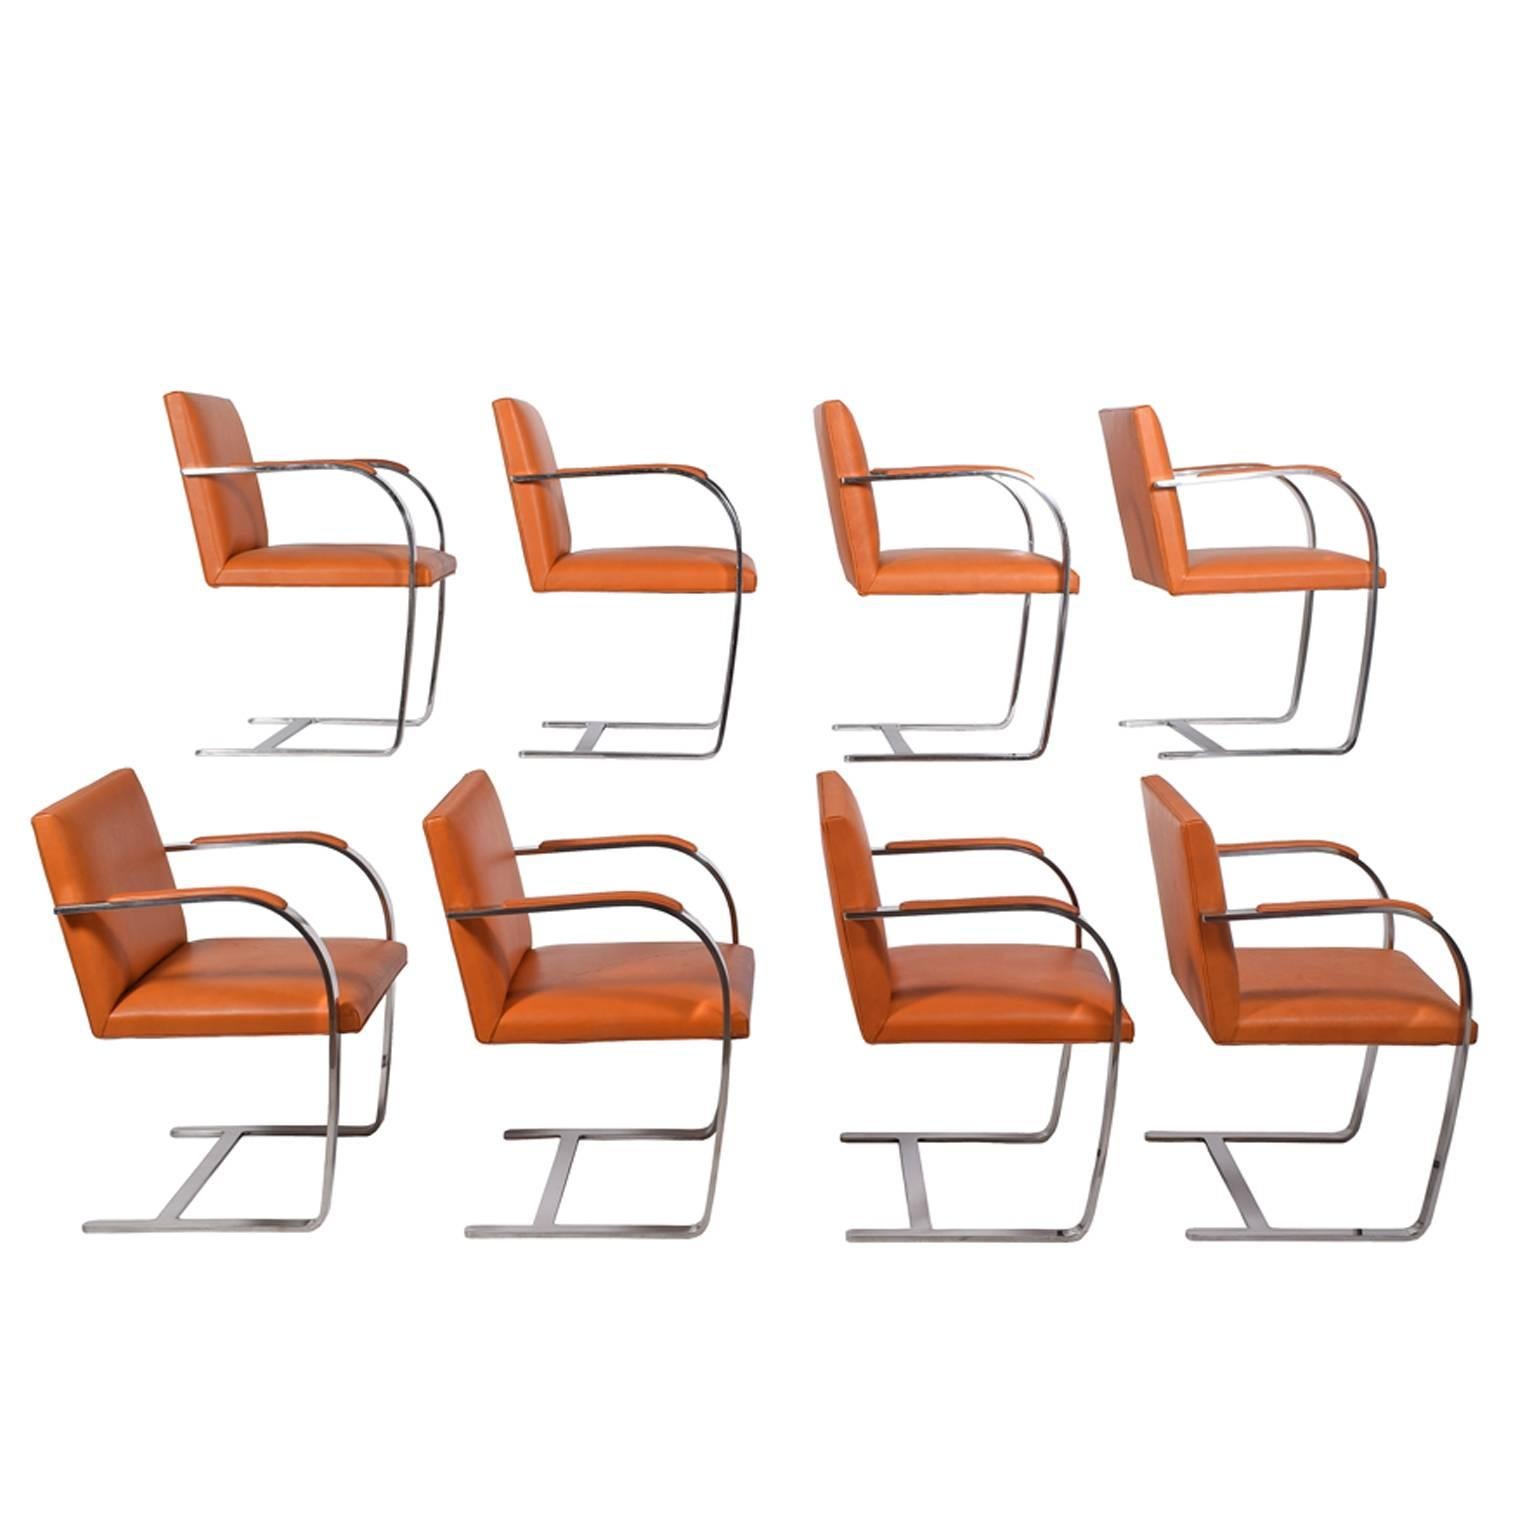 Eight Classic Mies van der Rohde chairs with stainless steel flat bar frame and arm pads and upholstered in leather. Made by Knoll International.
Measures: Arm height measures 25.75.